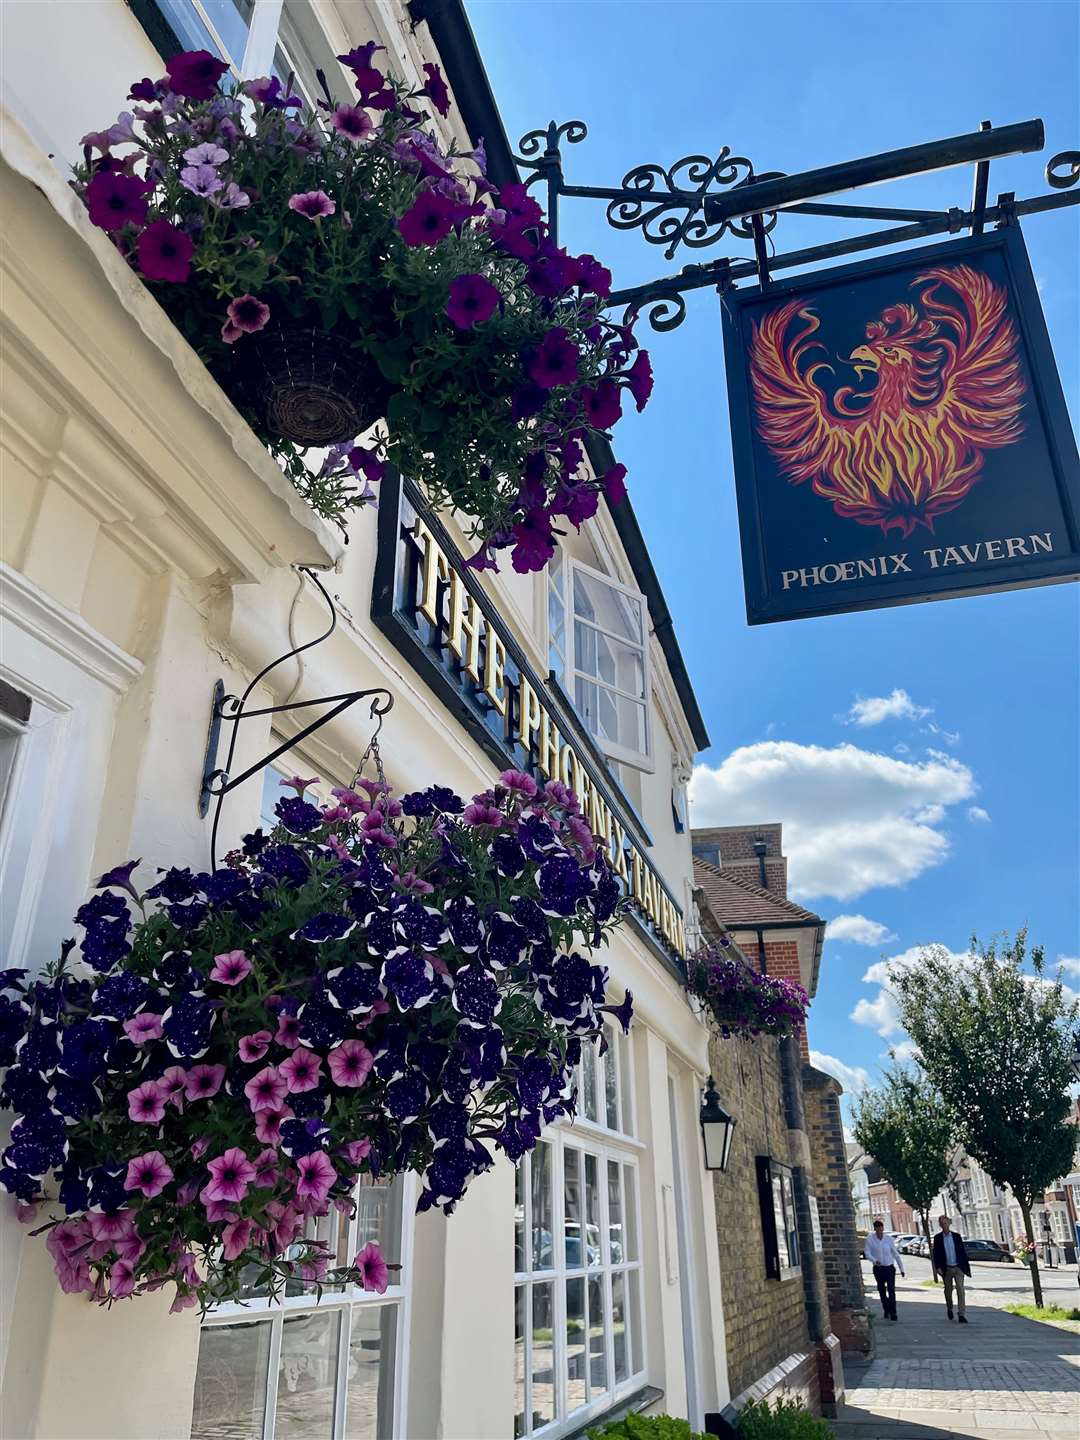 The Phoenix Tavern in Faversham opened just as the Covid lockdowns came to an end